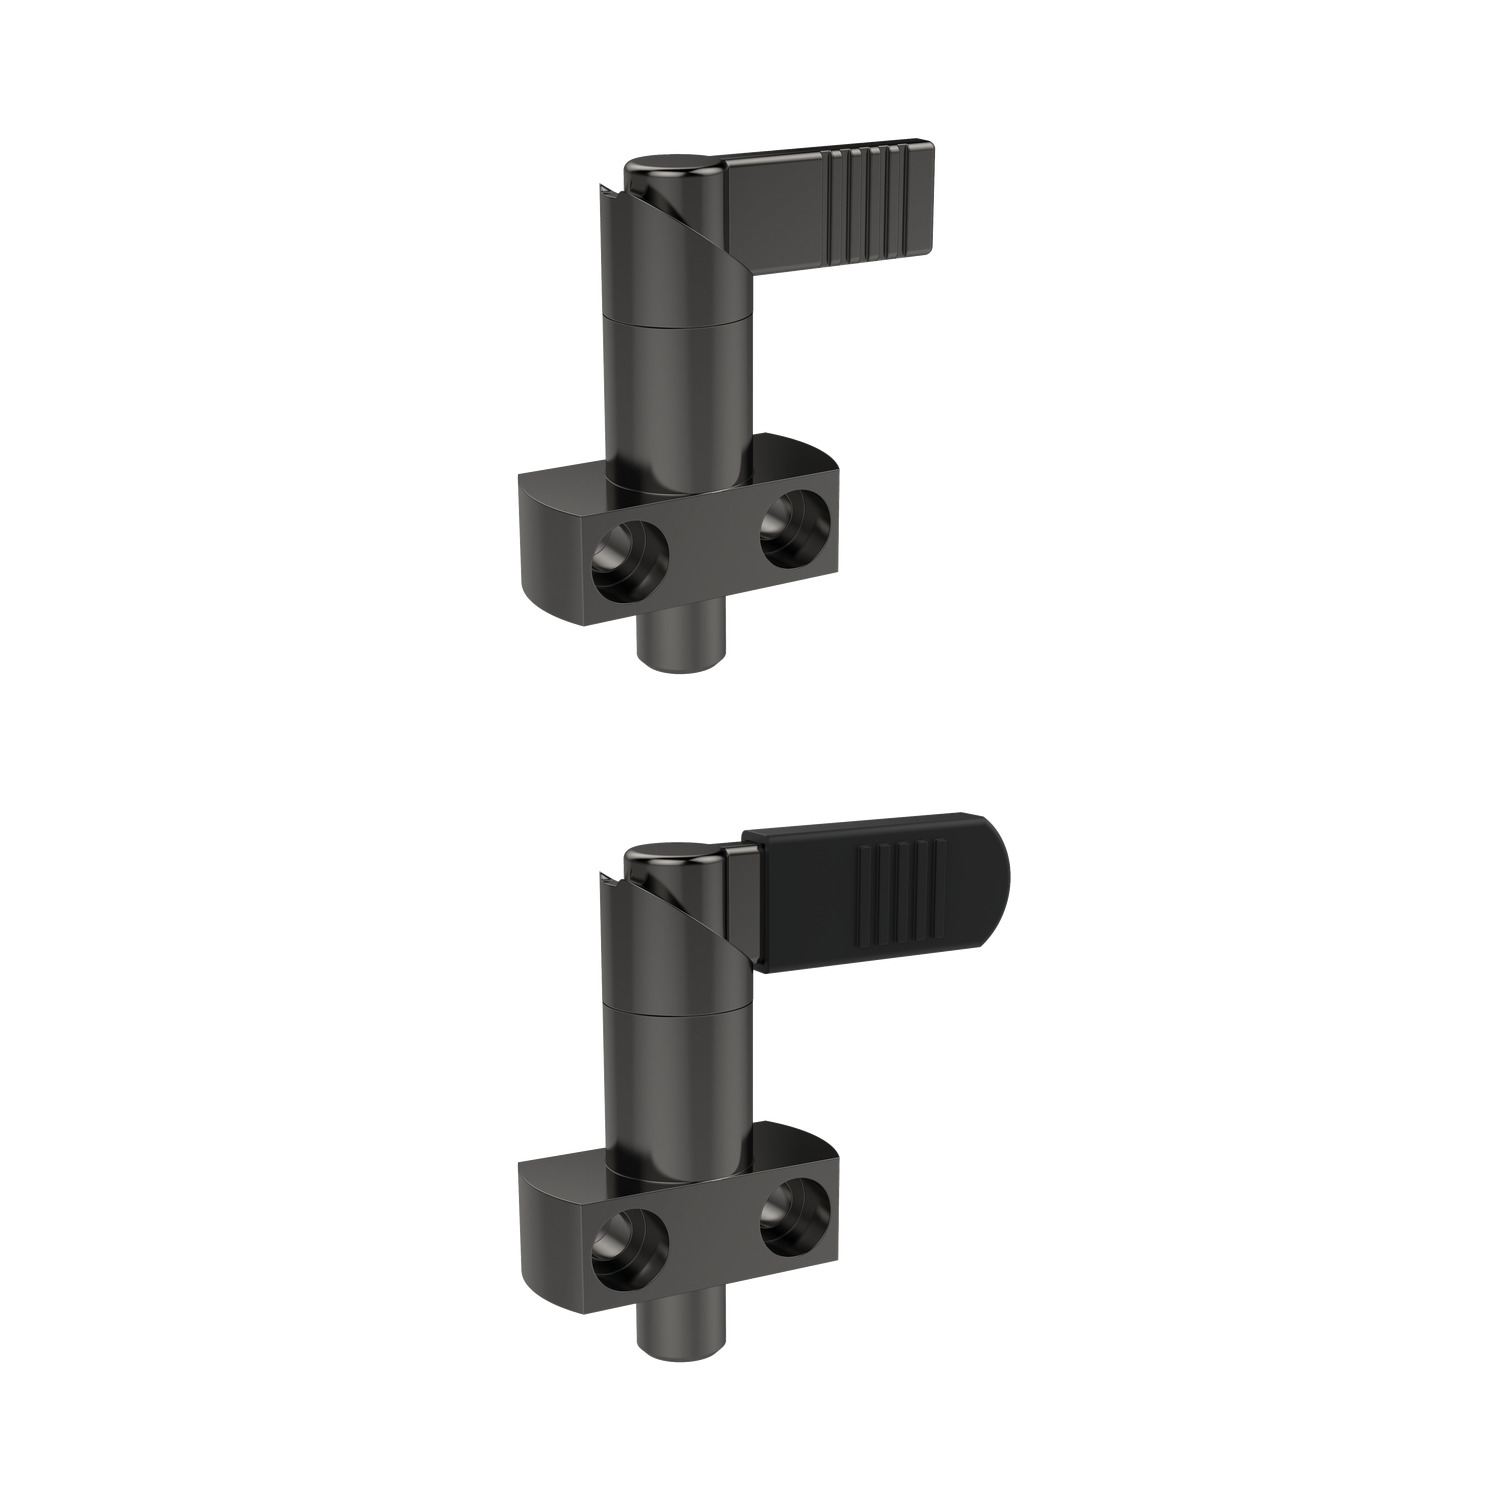 Index Plungers - Lever Grip Flange mounting lever grip index plunger with or without thermoplastic grip. Finished in anti-glare matte black. Turn lever 180° to retract pin.